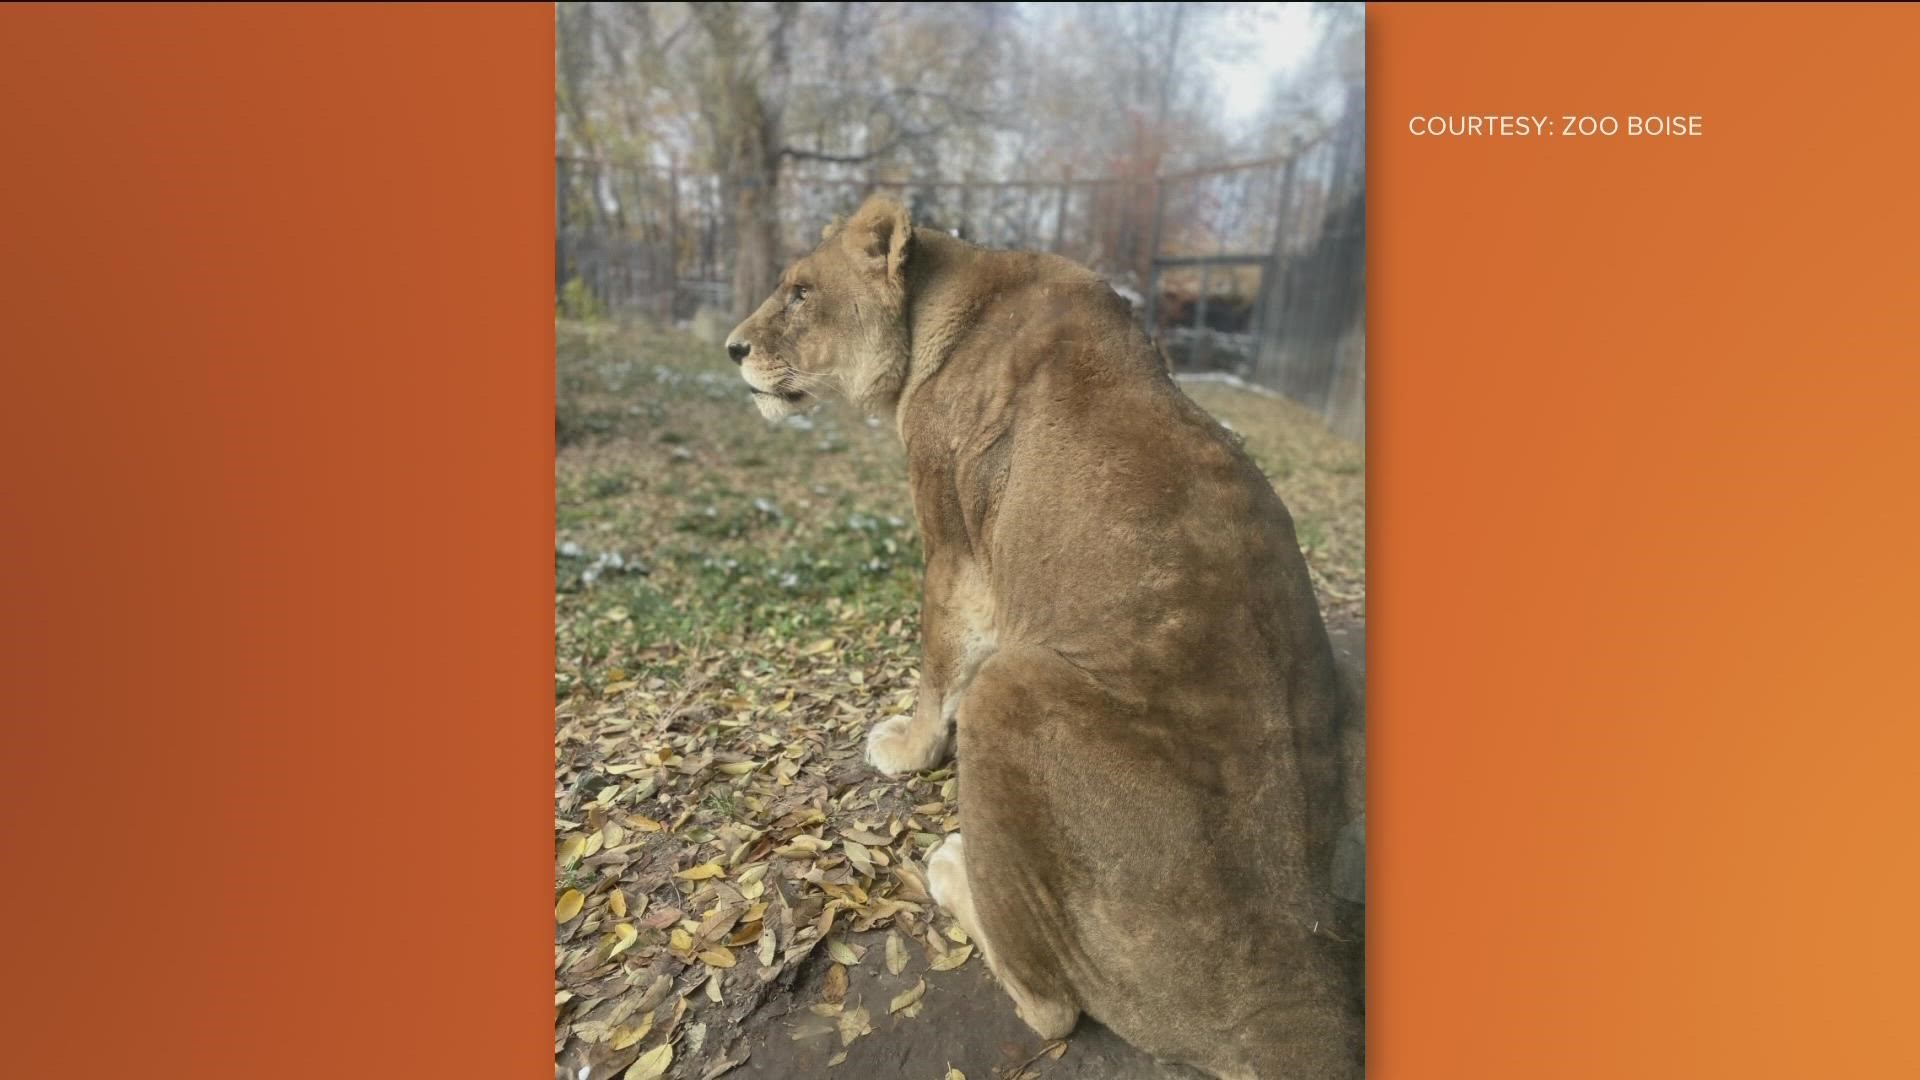 The 22-year-old female lion was euthanized after her health continued to decline.